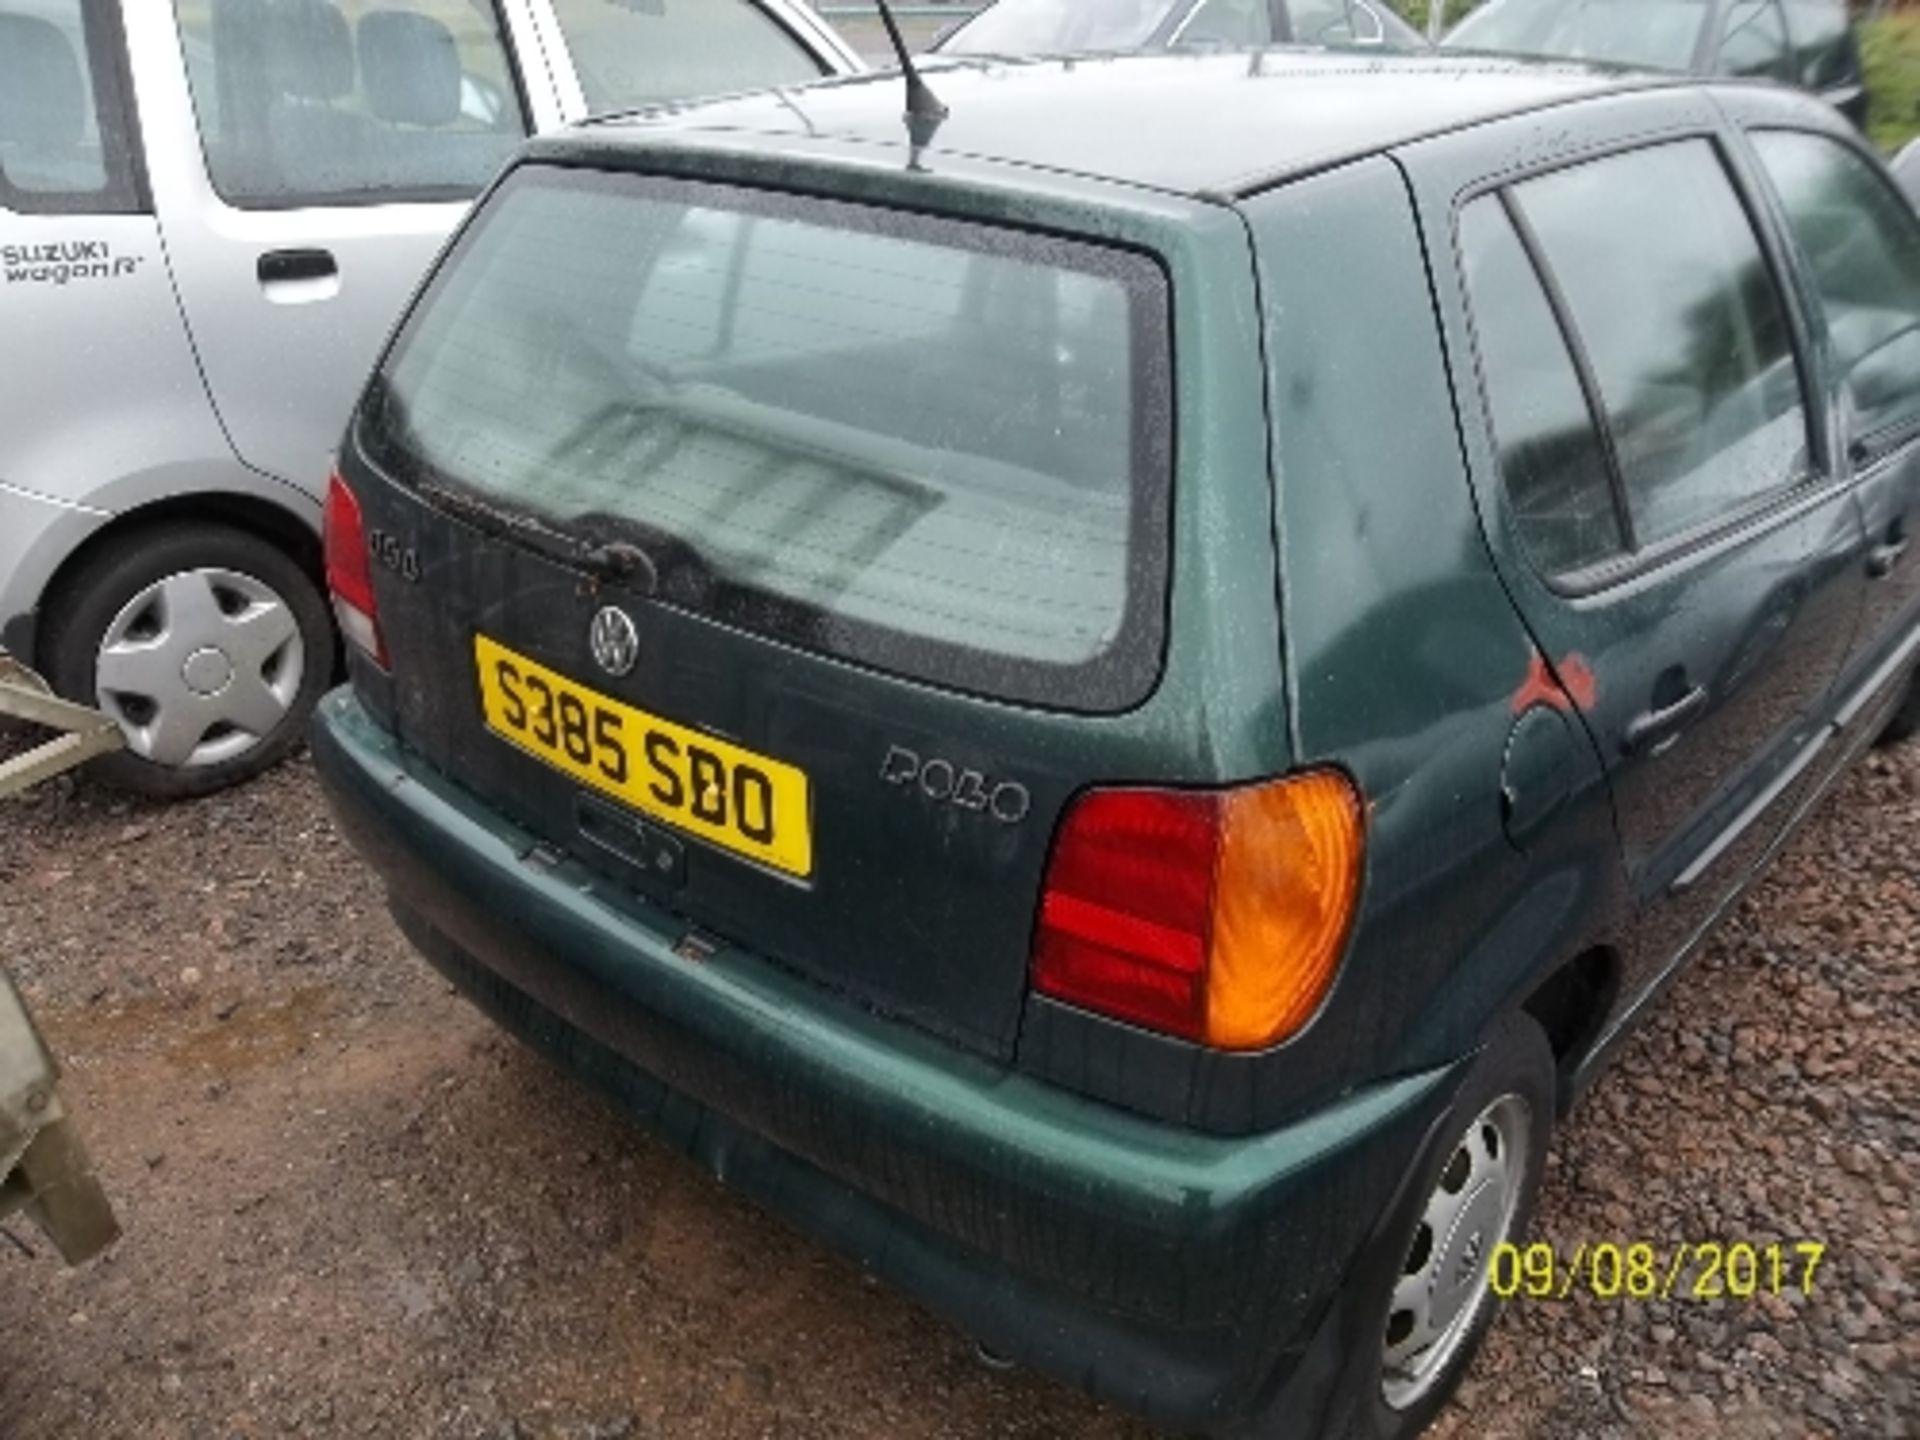 Volkswagen Polo 1.4 L - S385 SBO Date of registration: 22.09.1998 1390cc, petrol, manual, green - Image 3 of 4